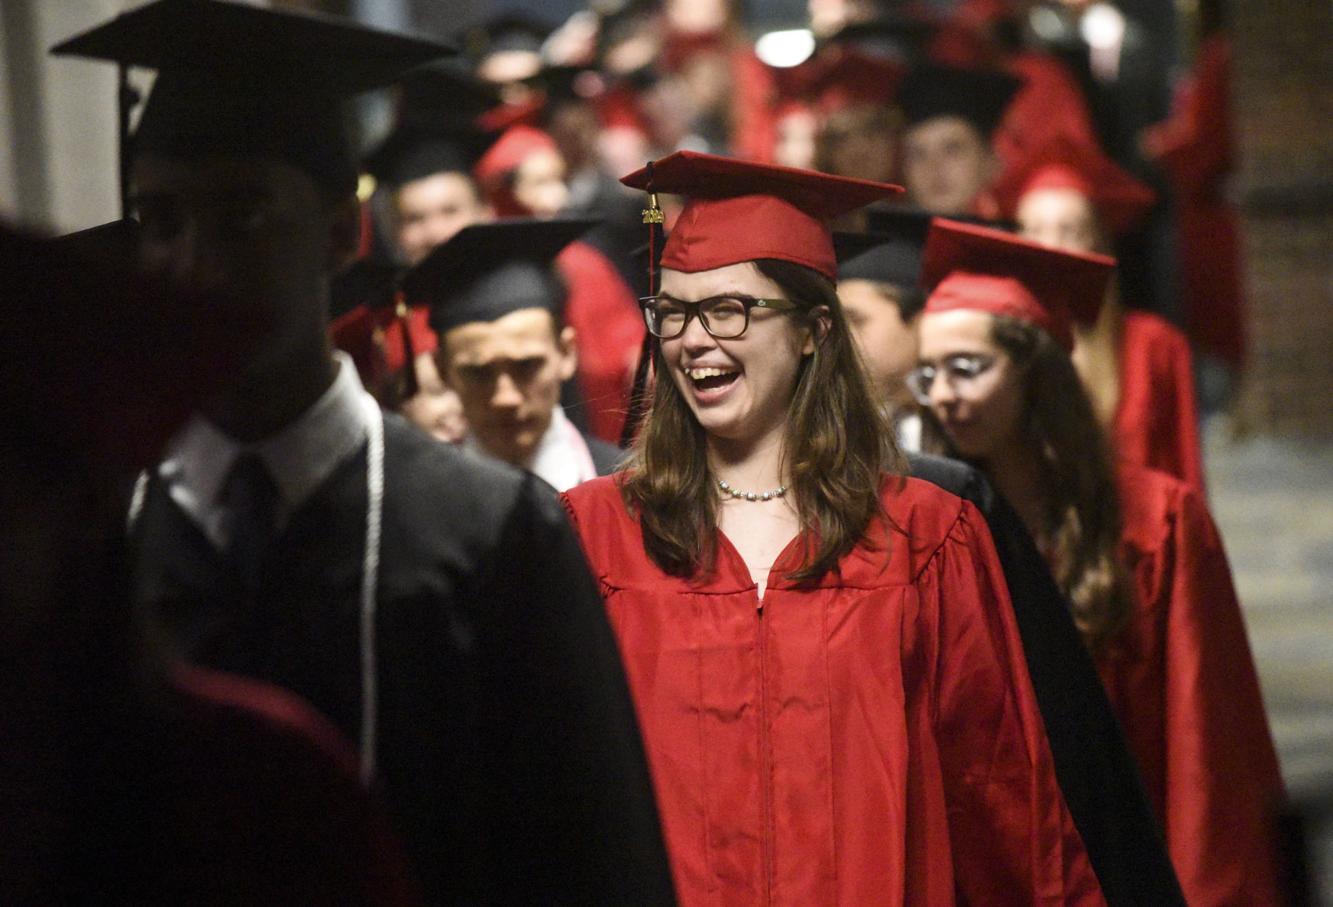 Hempfield class of 2019 graduation 'you personally are needed to